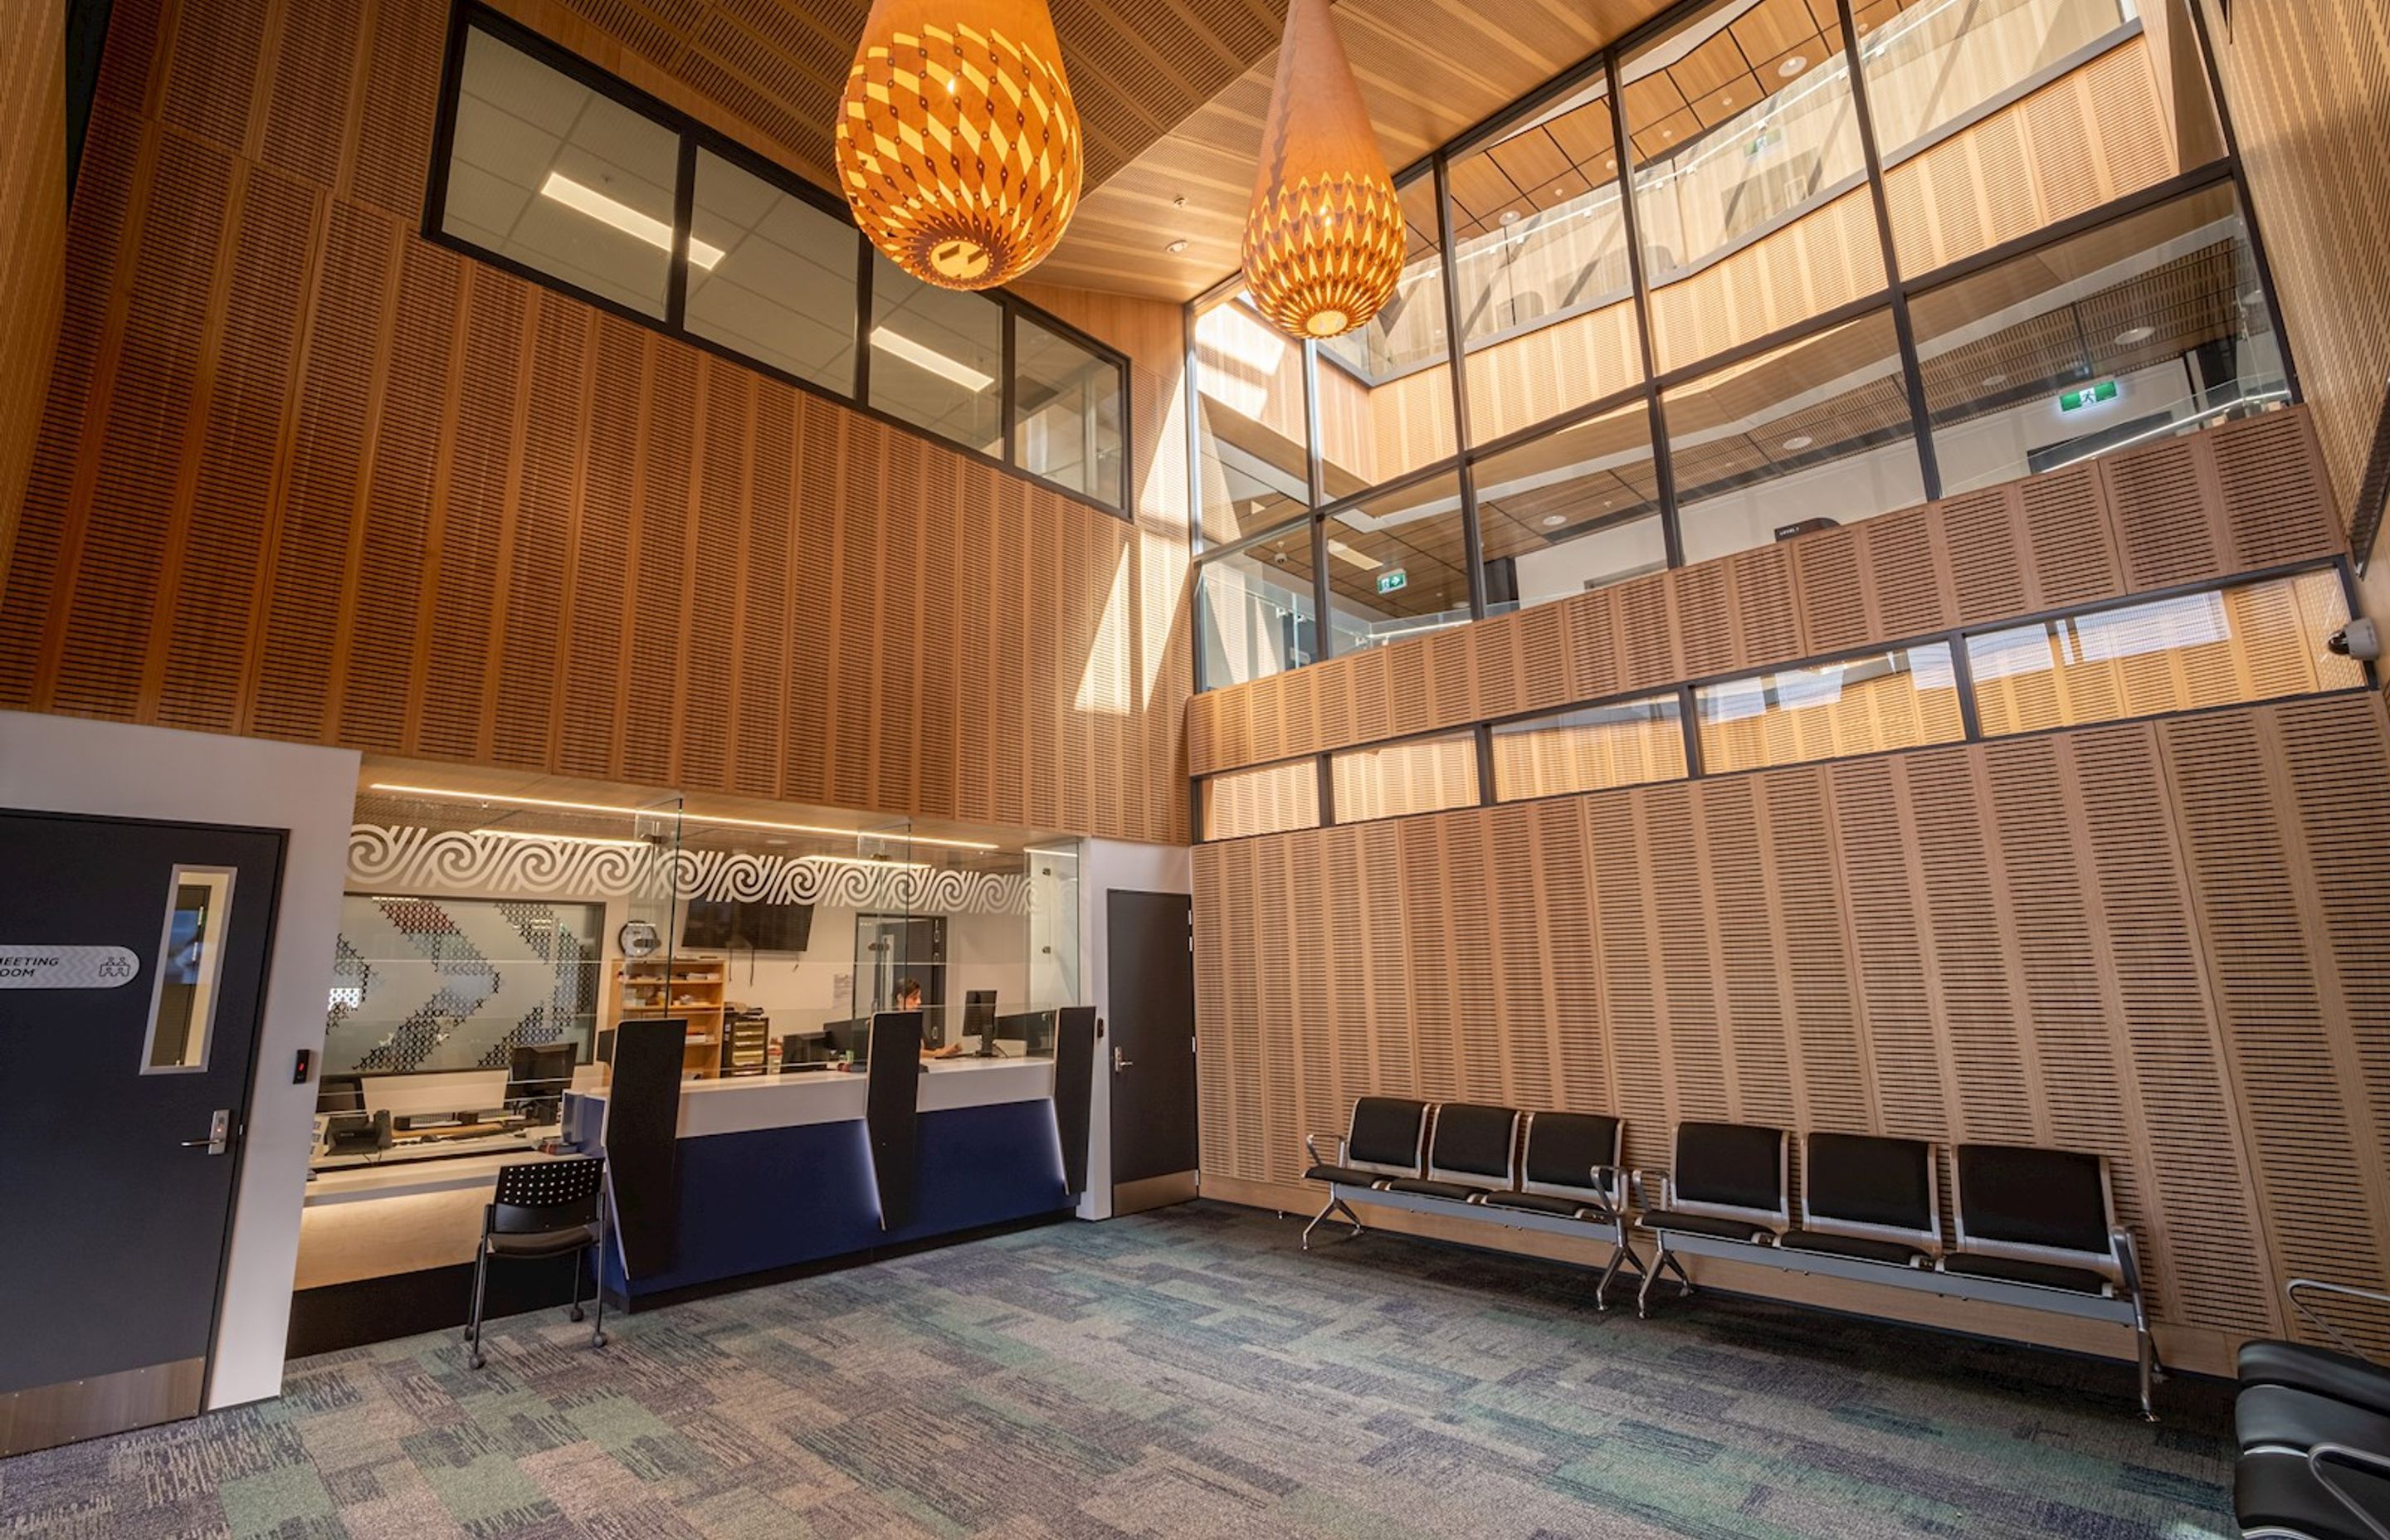 Design Award winning projects with Décortech’s Acoustic Wall &amp; Ceiling Panels.